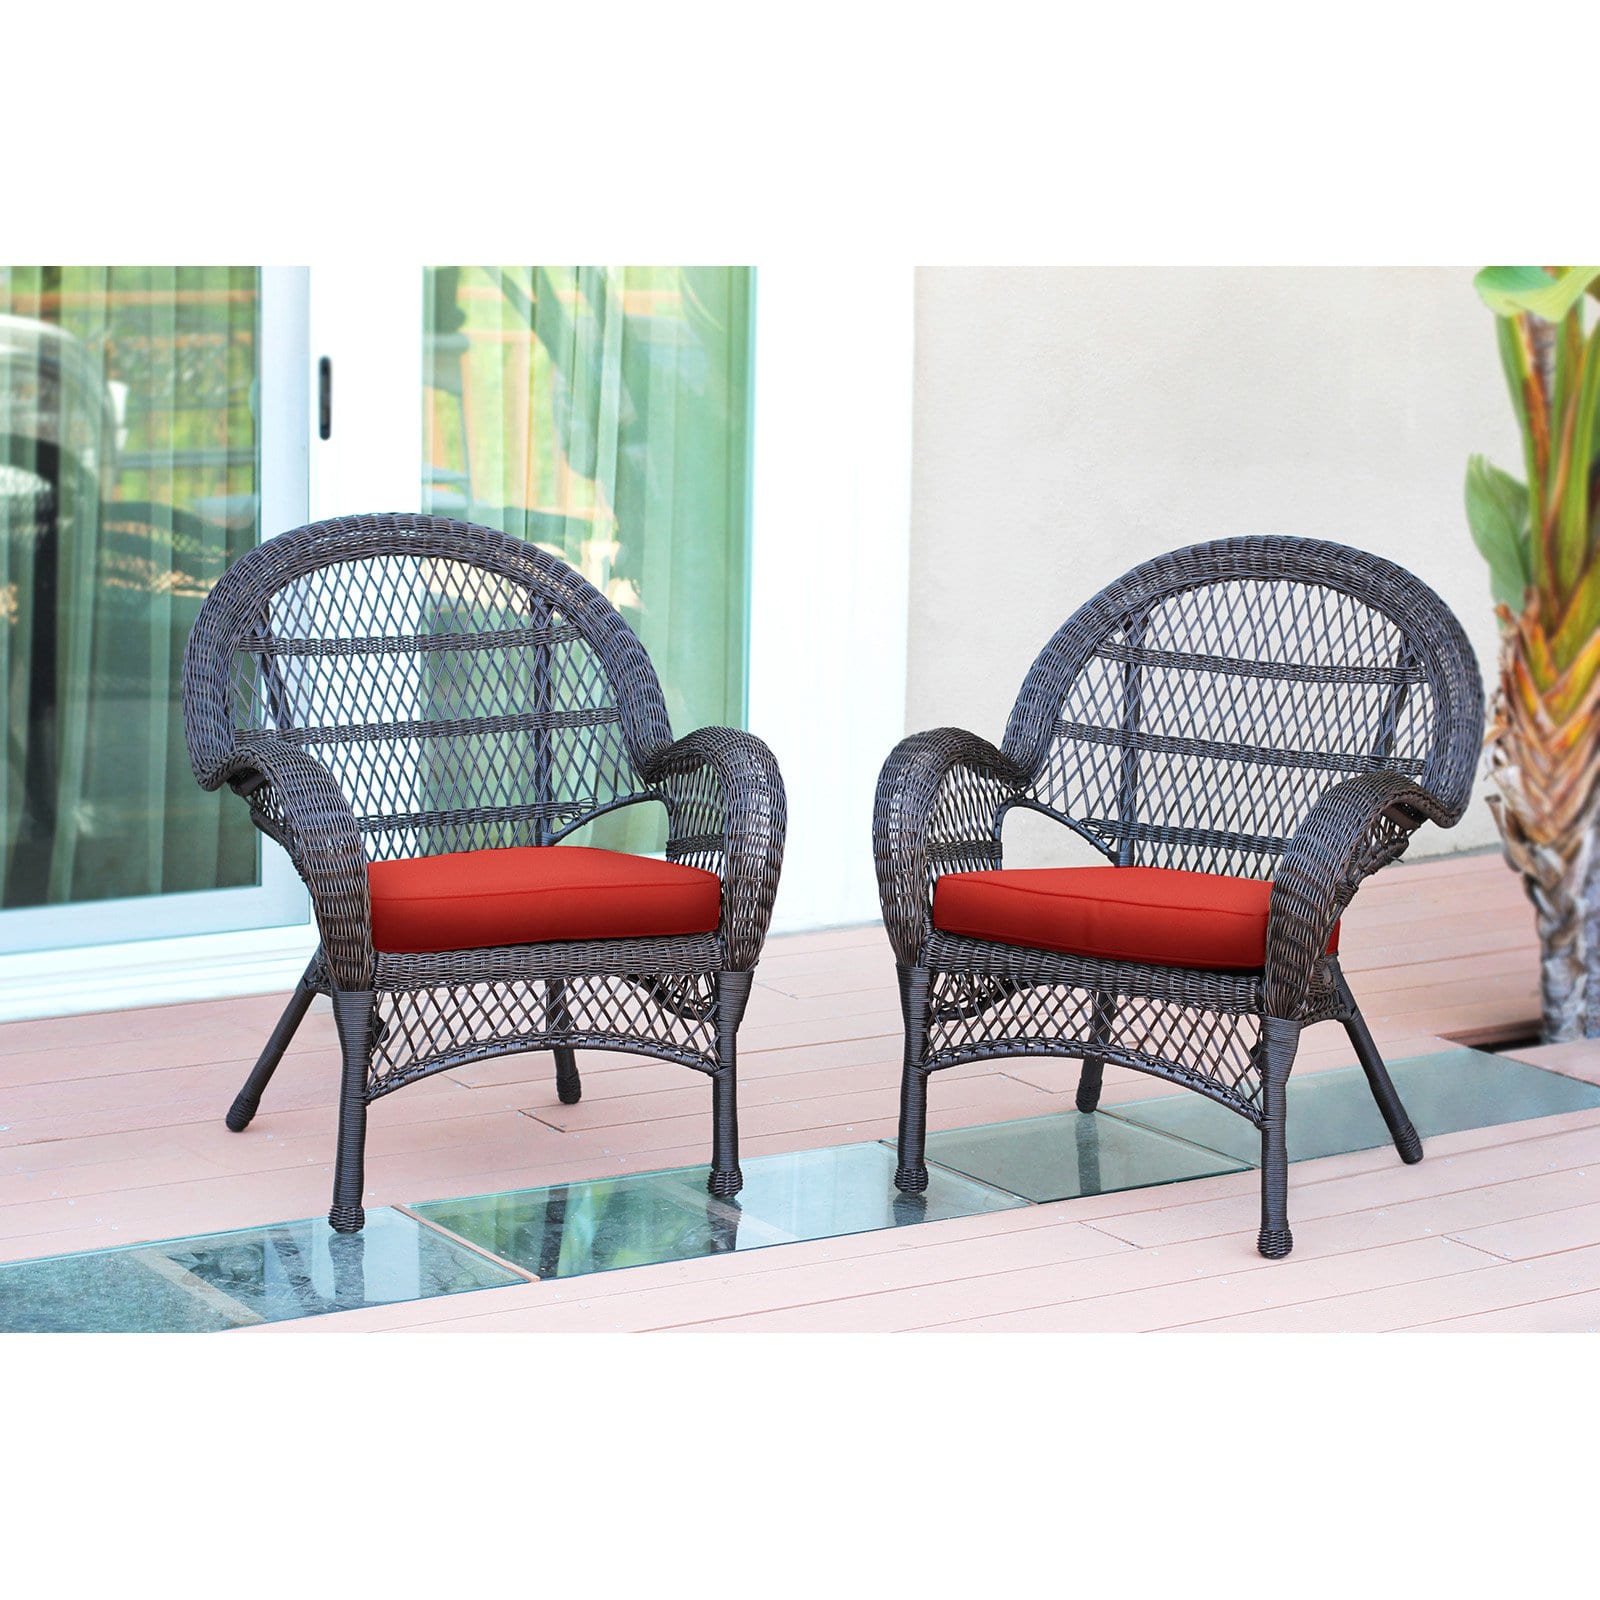 Jeco Wicker Chair in Espresso with Green Cushion (Set of 2) - image 5 of 11